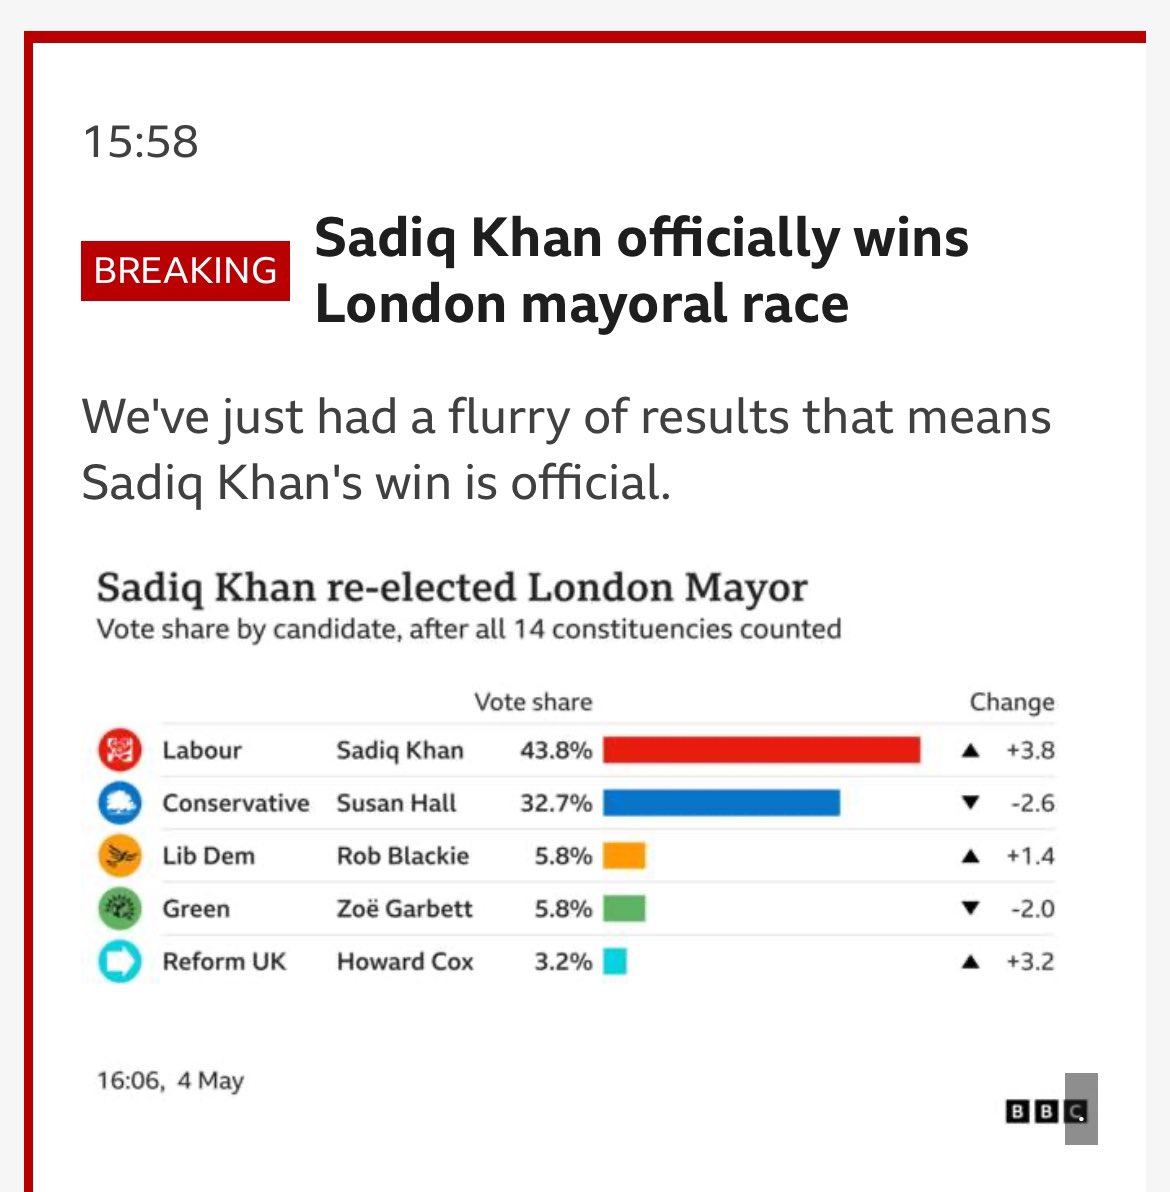 As Minister for London, I congratulate @SadiqKhan on his re-election as Mayor & I look forward to working constructively with him. Commiserations to @Councillorsuzie who fought very hard & to all our @conservatives teams across London for their efforts. Closer than predicted!